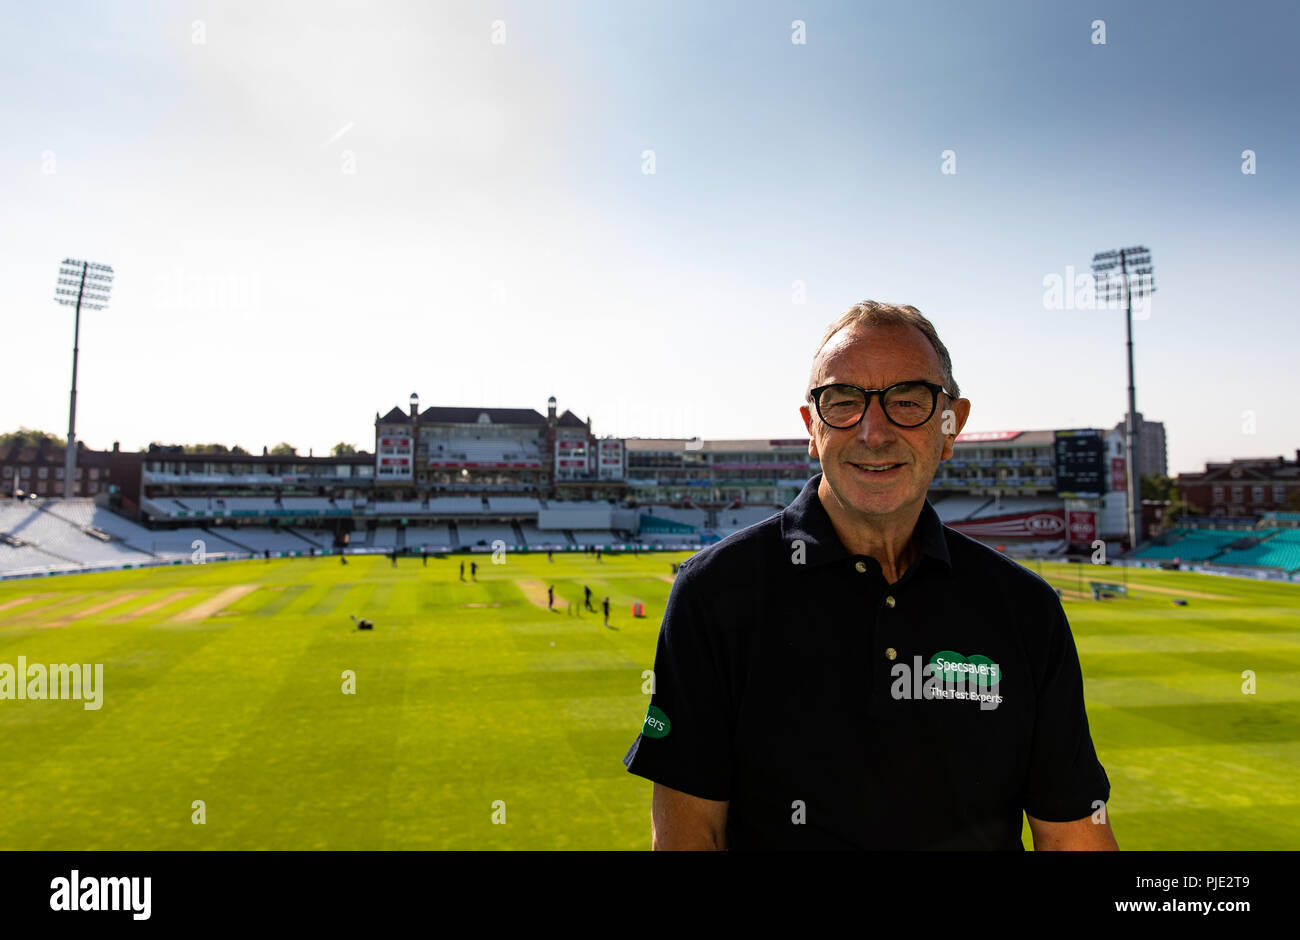 David 'Bumble' Lloyd poses for a photographer during a Specsavers event at the Kia Oval, London. PRESS ASSOCIATION Photo. Picture date: Thursday September 6, 2018. Photo credit should read: Steven Paston/PA Wire Stock Photo